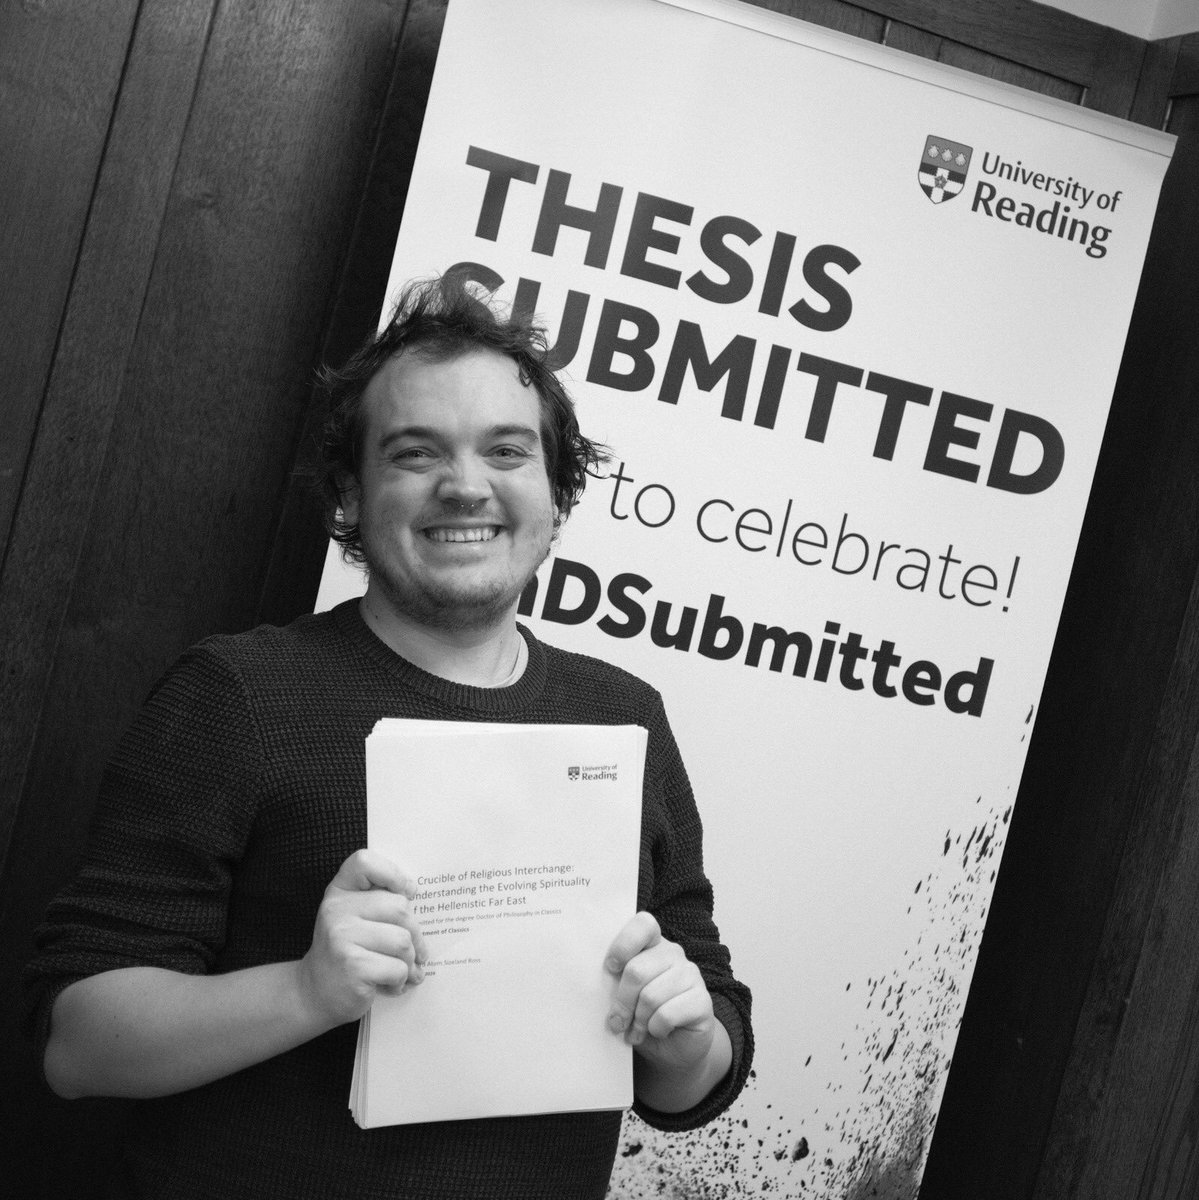 1489 days later… my #PhD is #submitted!

Thank you everyone for your support over these last 4 years. Now just to survive the viva.

📷: Matthew Knight

#phdchat #phdsubmitted #academictwitter #academicchatter #phdvoice #classics #buddhiststudies #buddhism #gradschool